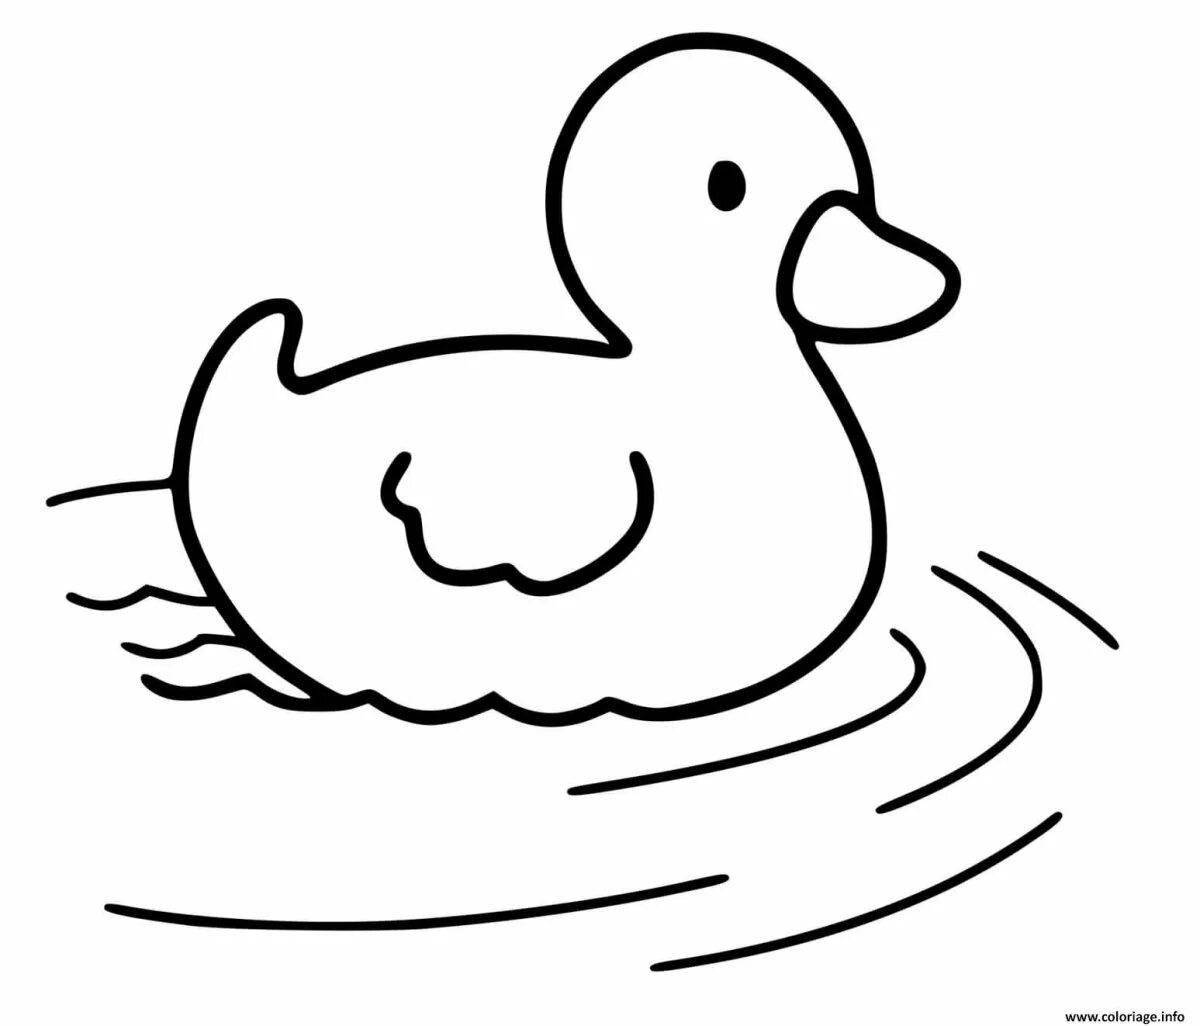 Coloring funny duck and duckling